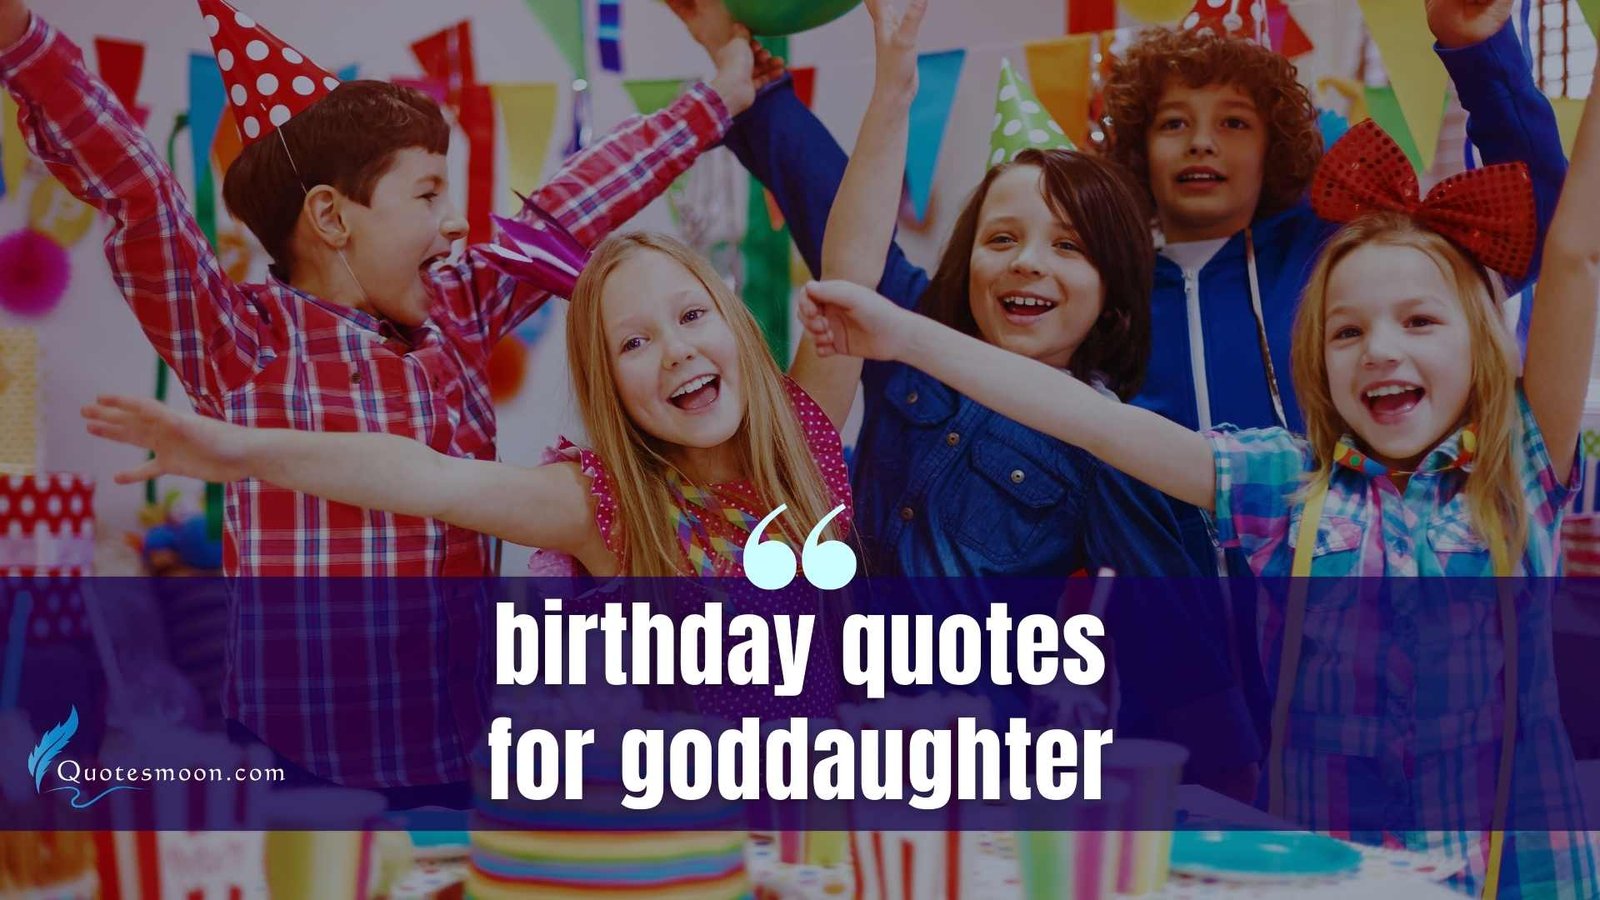 birthday quotes for goddaughter images